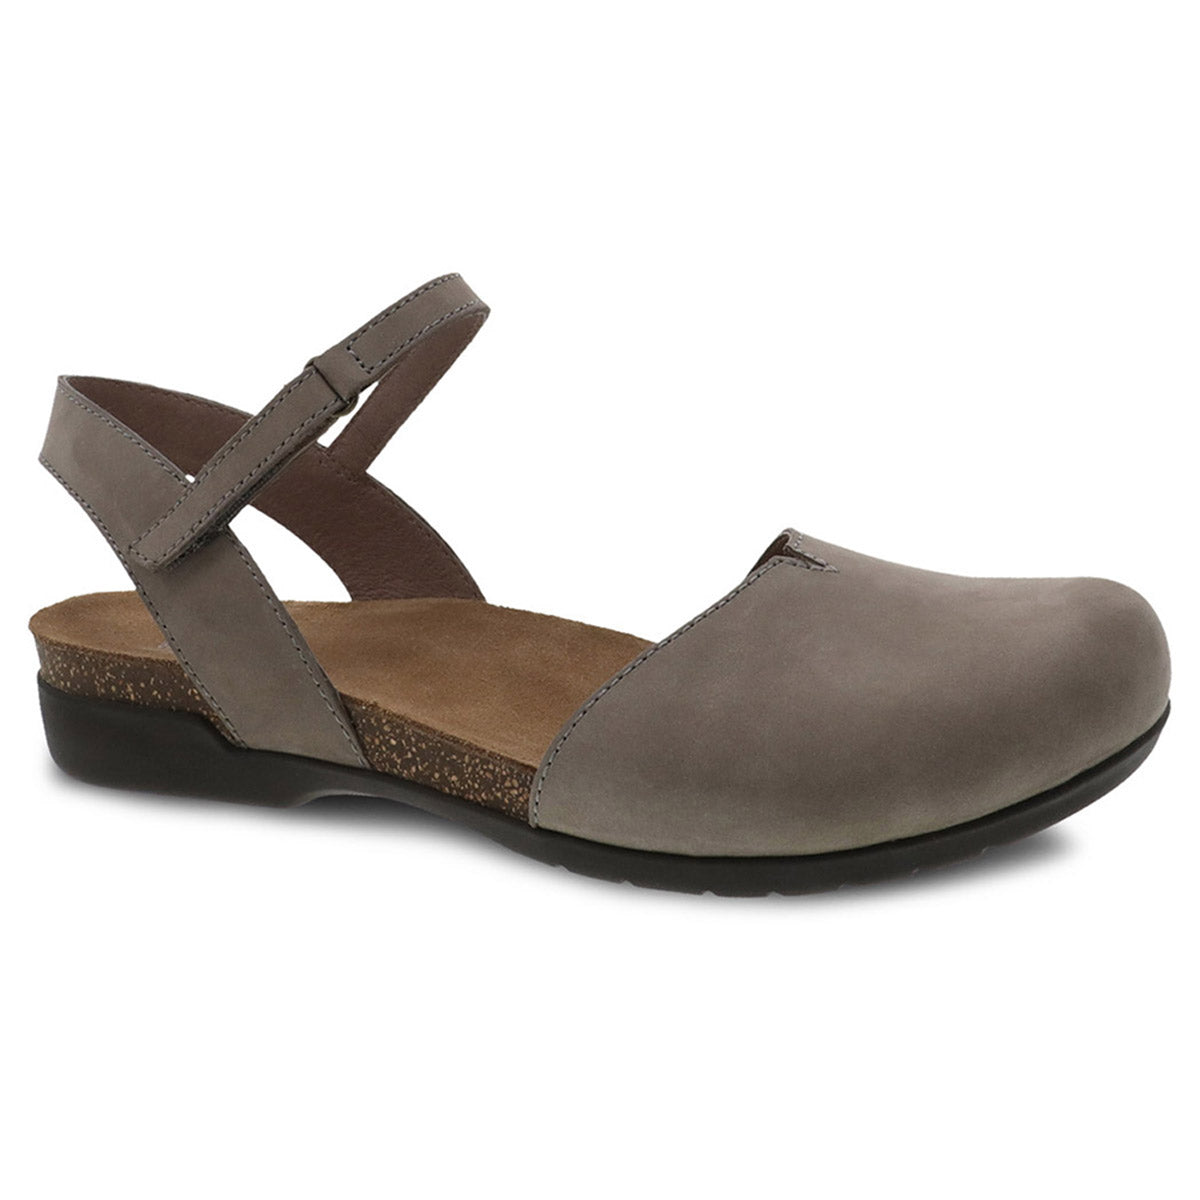 Women&#39;s Dansko Rowan Taupe casual leather sandal with an ankle strap on a white background.